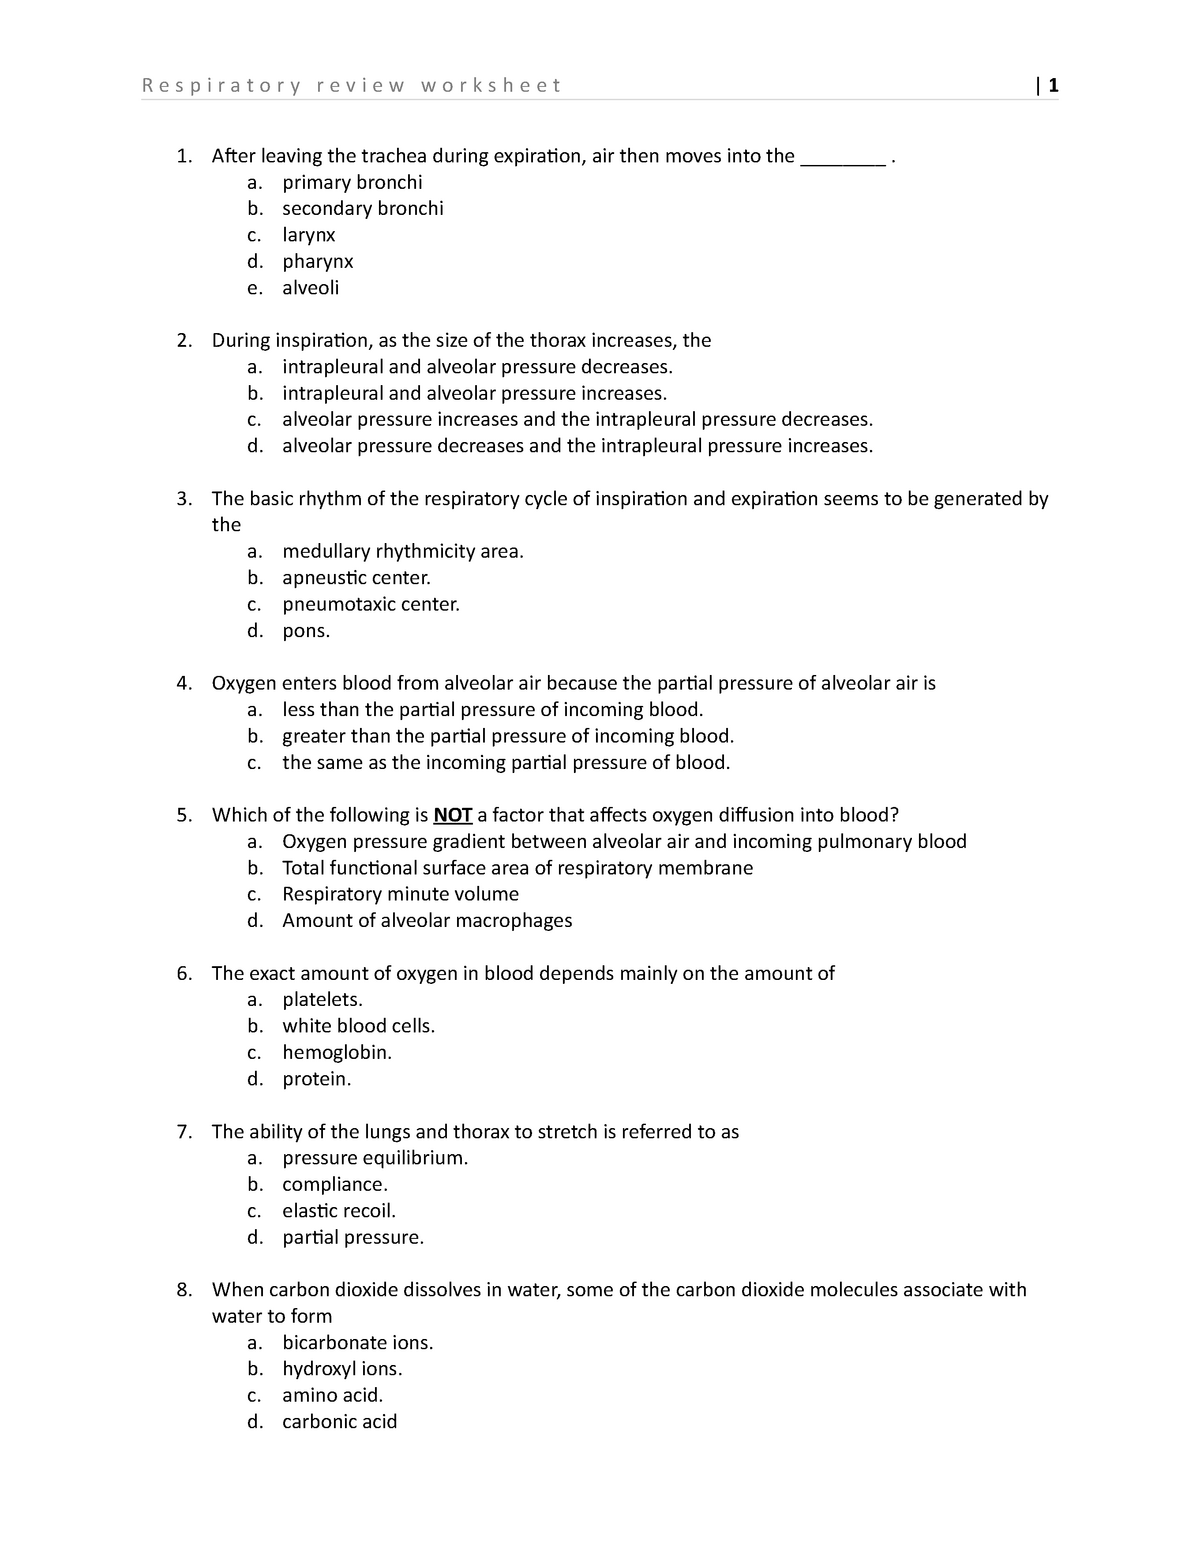 Respiratory review worksheet - After leaving the trachea during ...